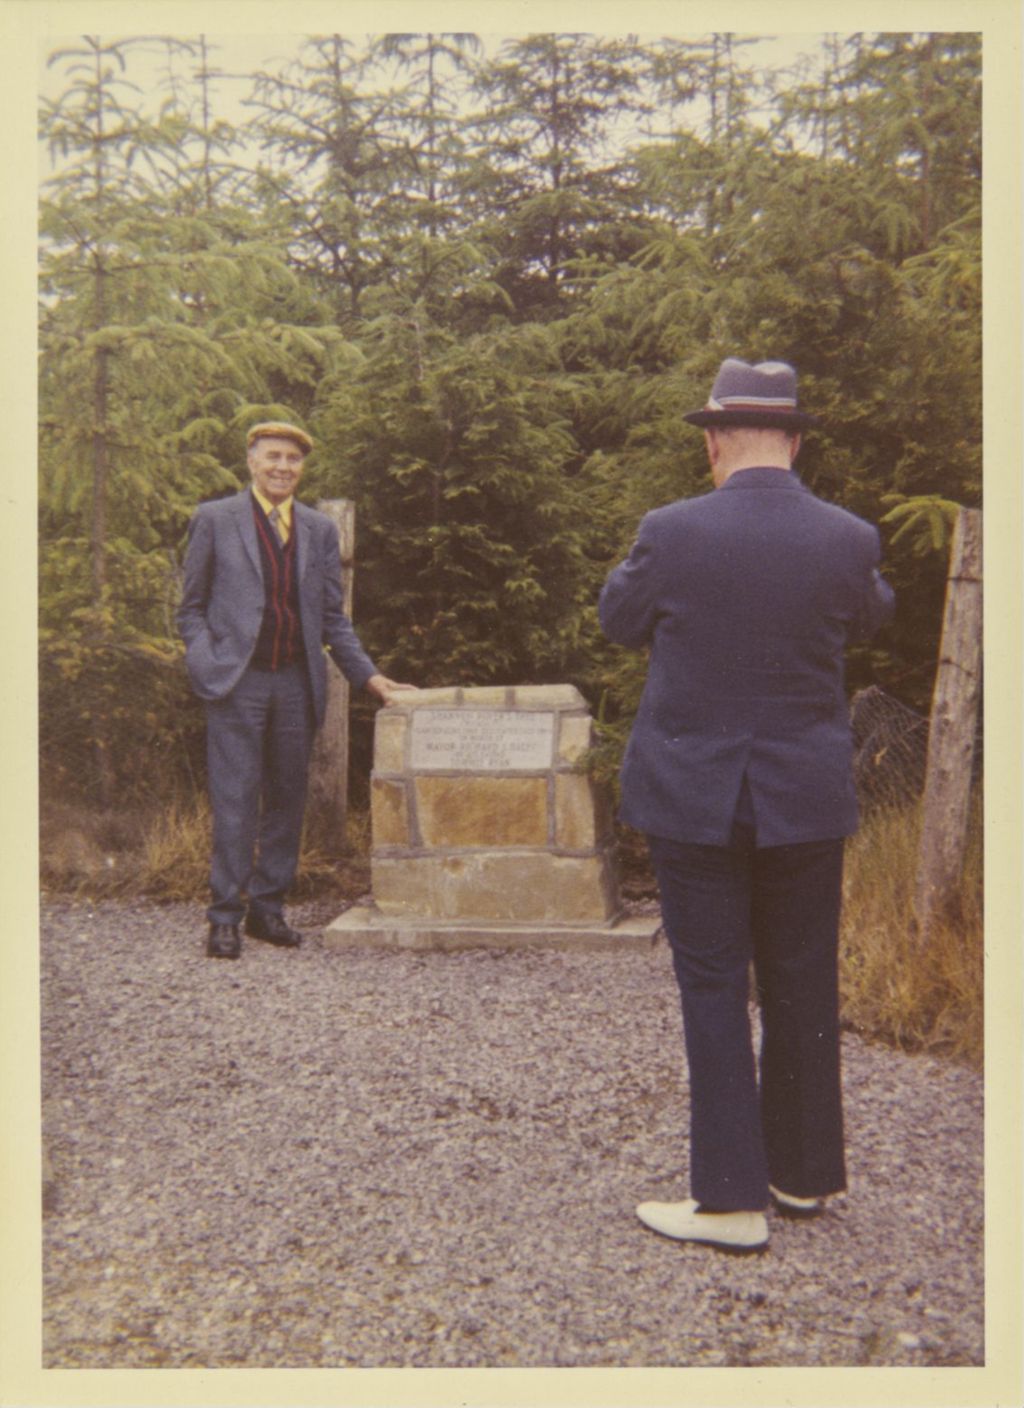 Monument for tree in Ireland dedicated to Richard J. Daley